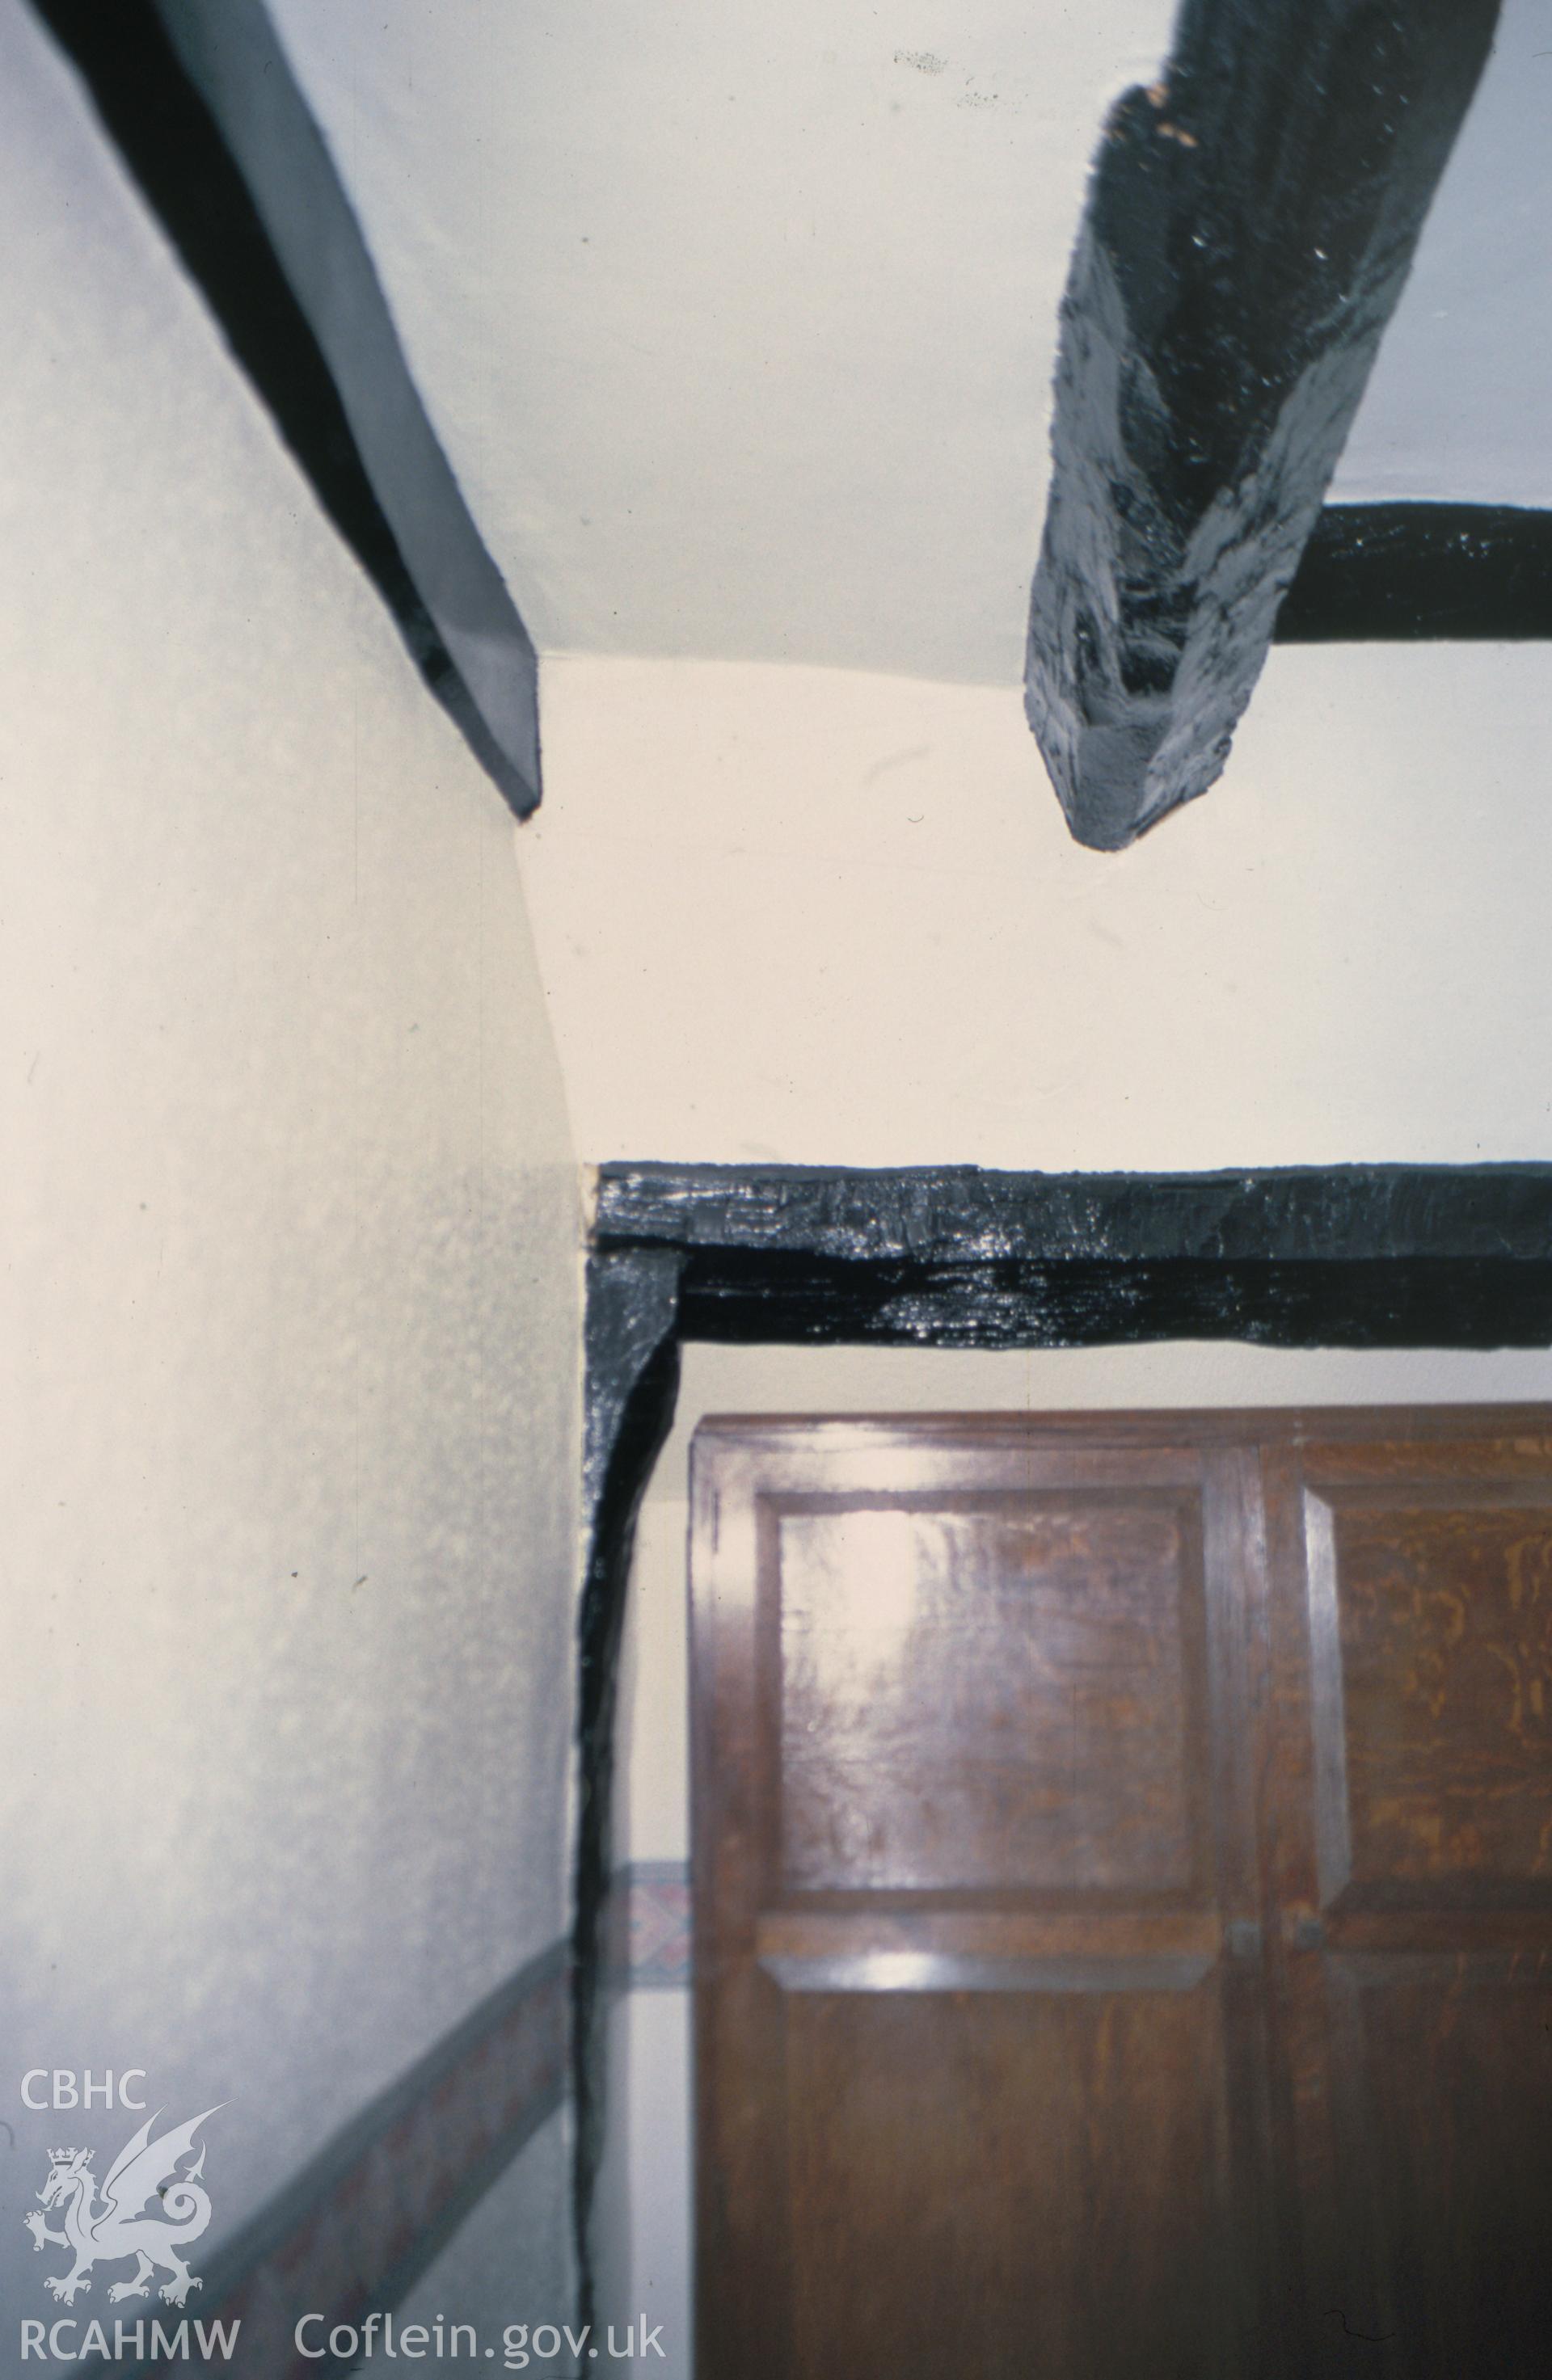 Interior view showing purlin in the ceiling of the attic passage roof.